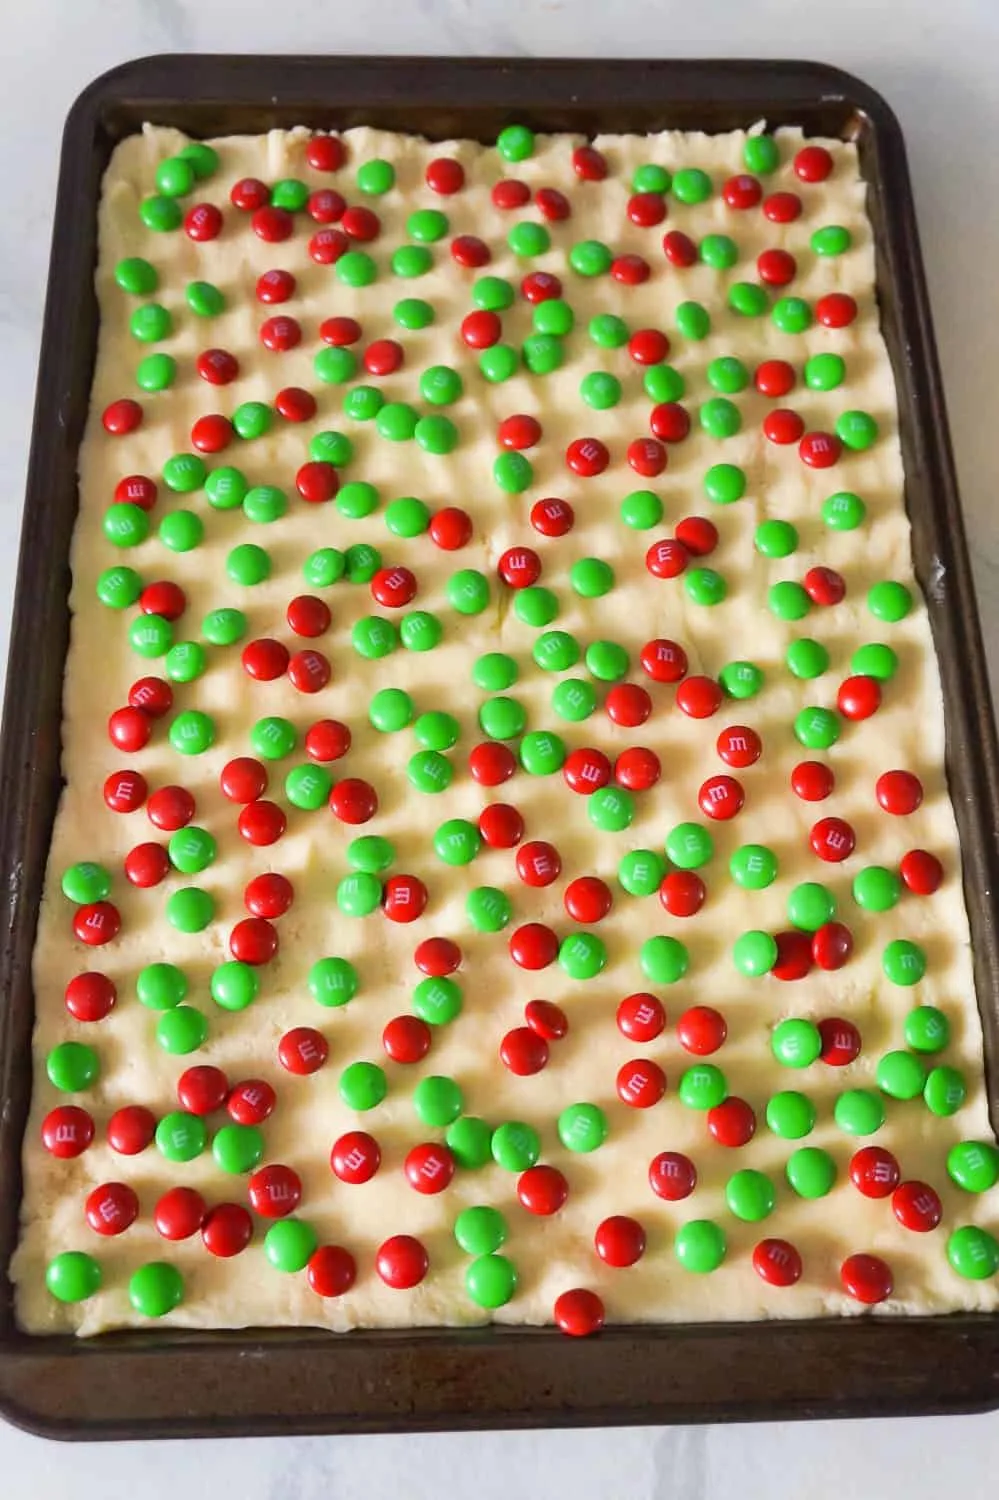 red and green M&M's on top of sugar cookie dough on a baking sheet